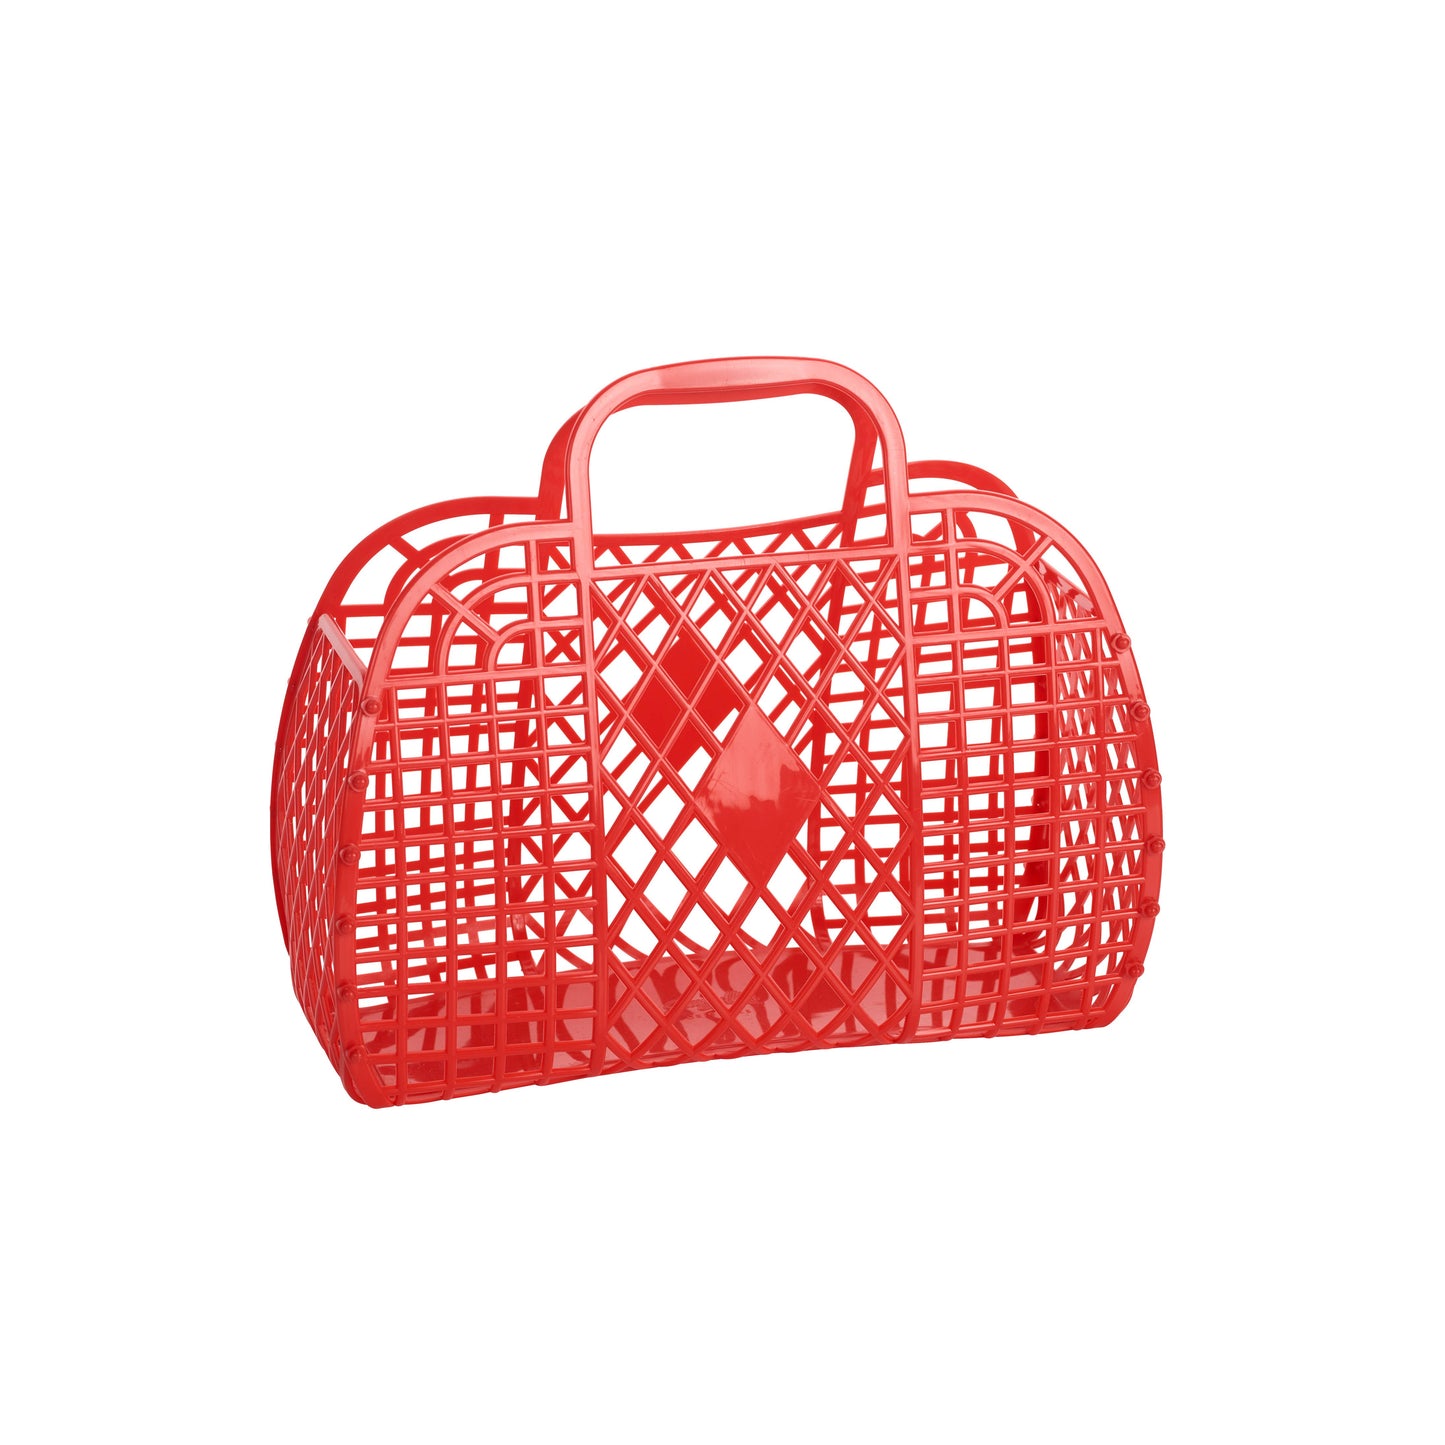 Load image into Gallery viewer, Retro Basket Jelly Bag - Small: Olive
